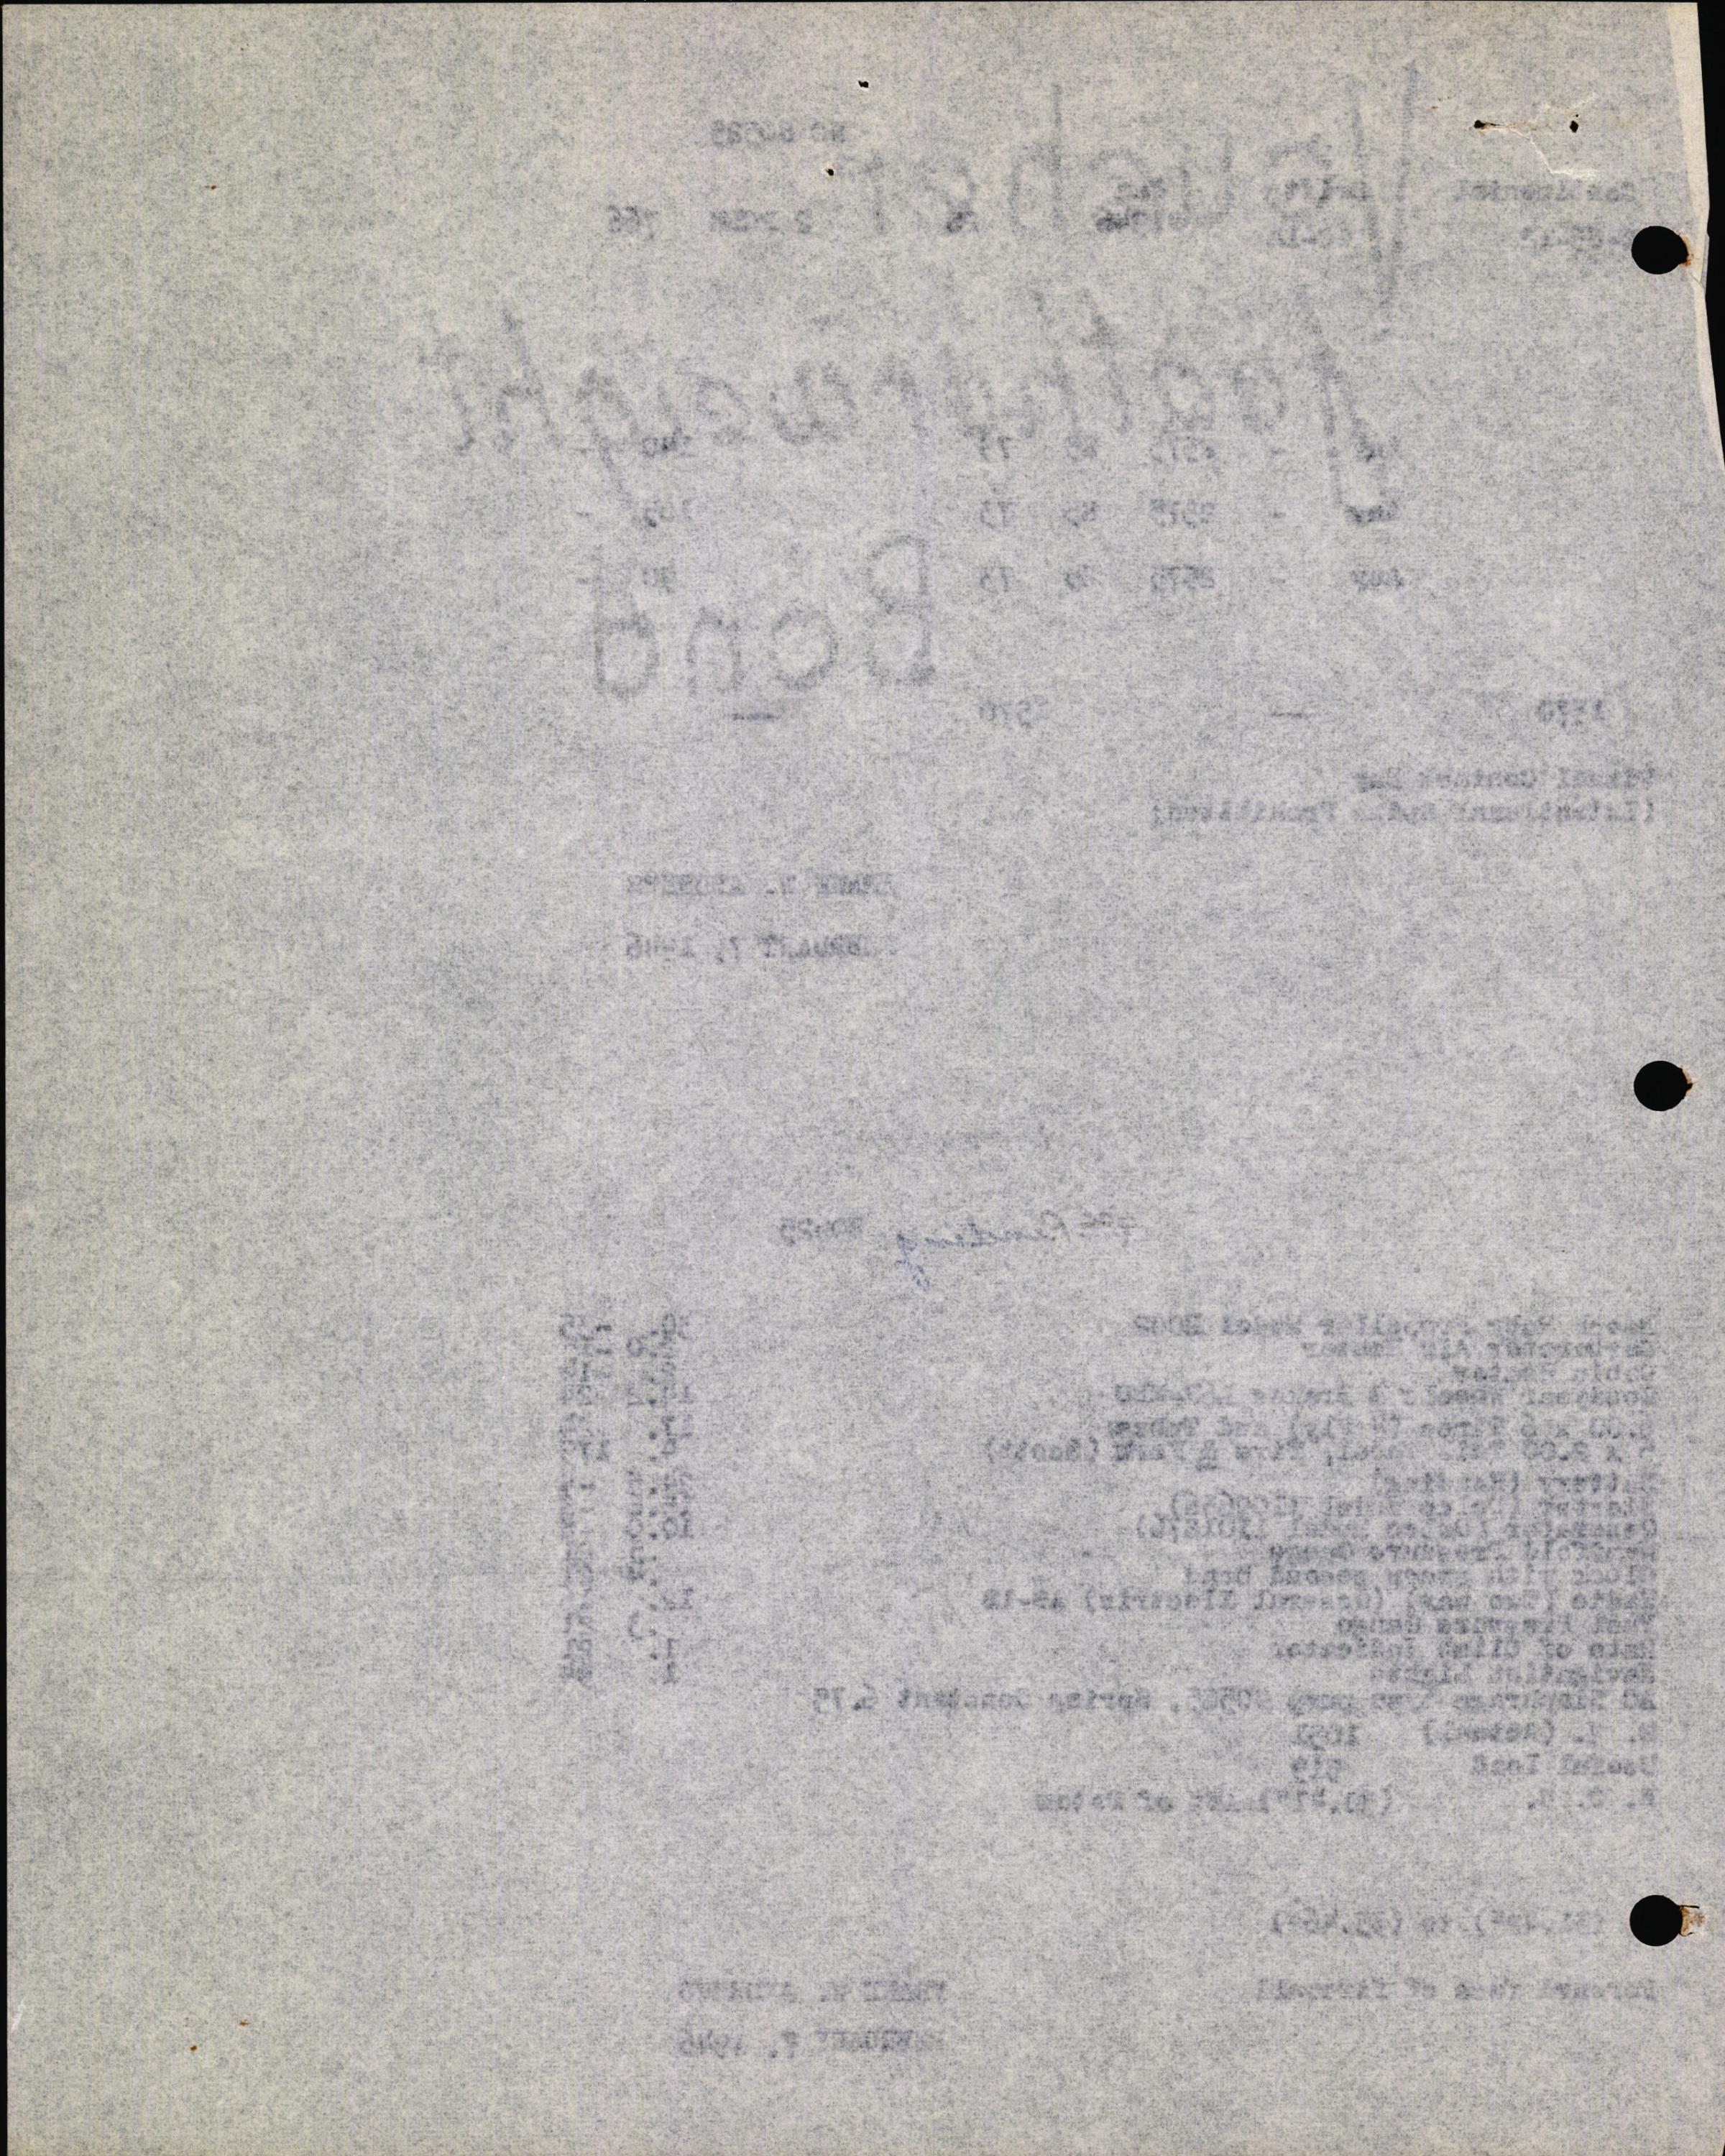 Sample page 4 from AirCorps Library document: Technical Information for Serial Number 28